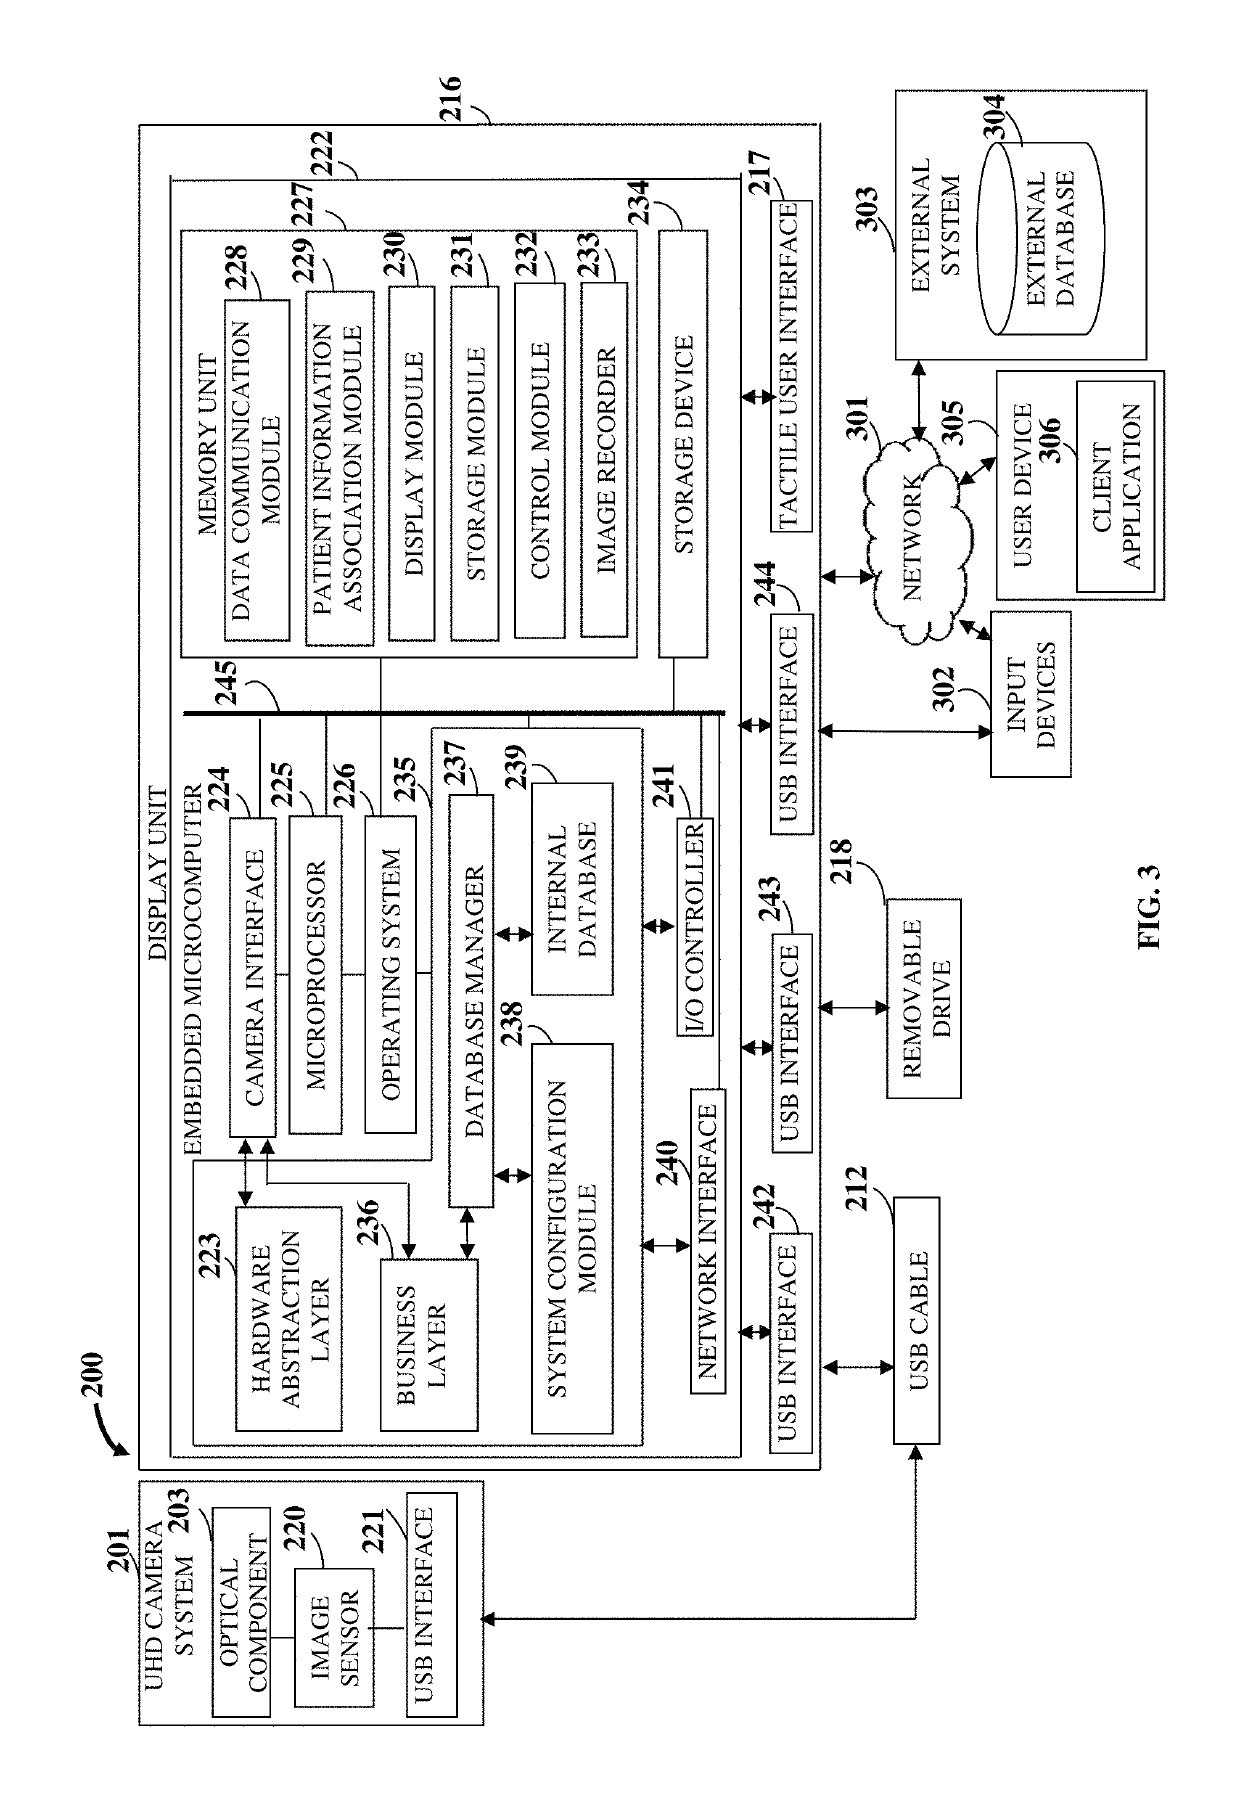 Surgical visualization and recording system